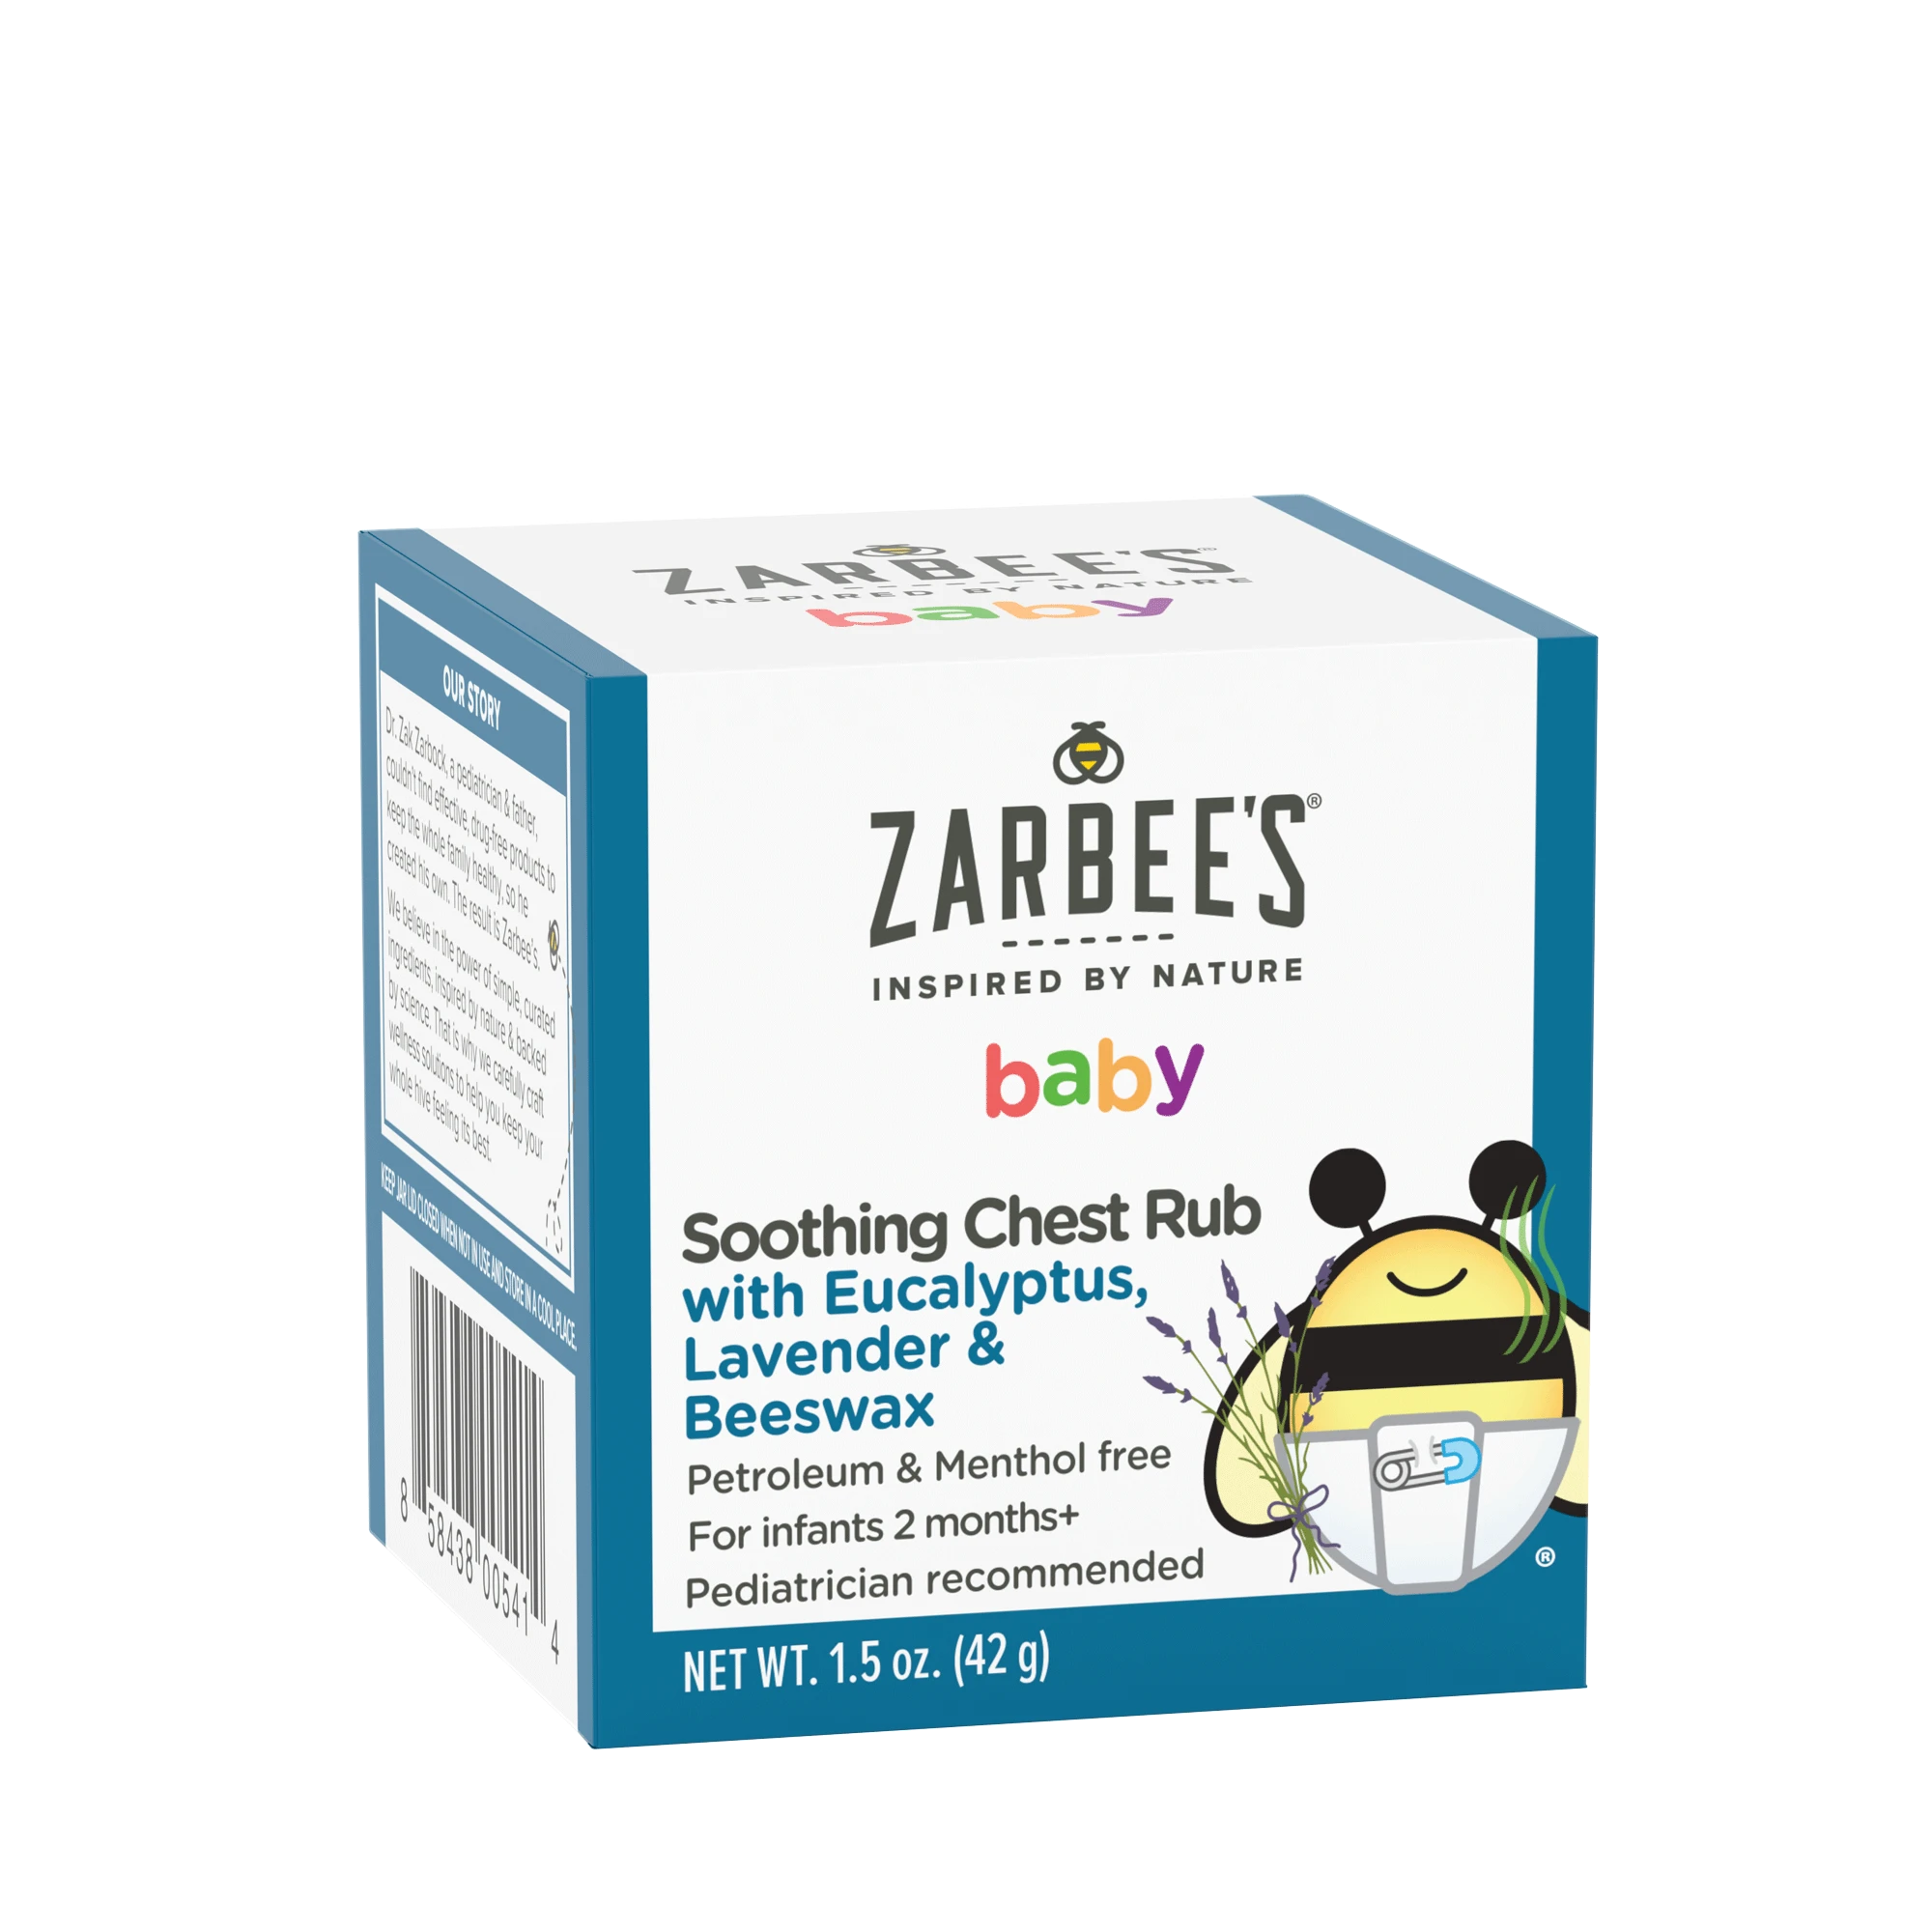 https://www.zarbees.com/sites/zarbees_us/files/product-images/541_zar_858438005414_us_baby_sooth_chest_rub_euc_lav_beeswax_1p5oz_00001.webp